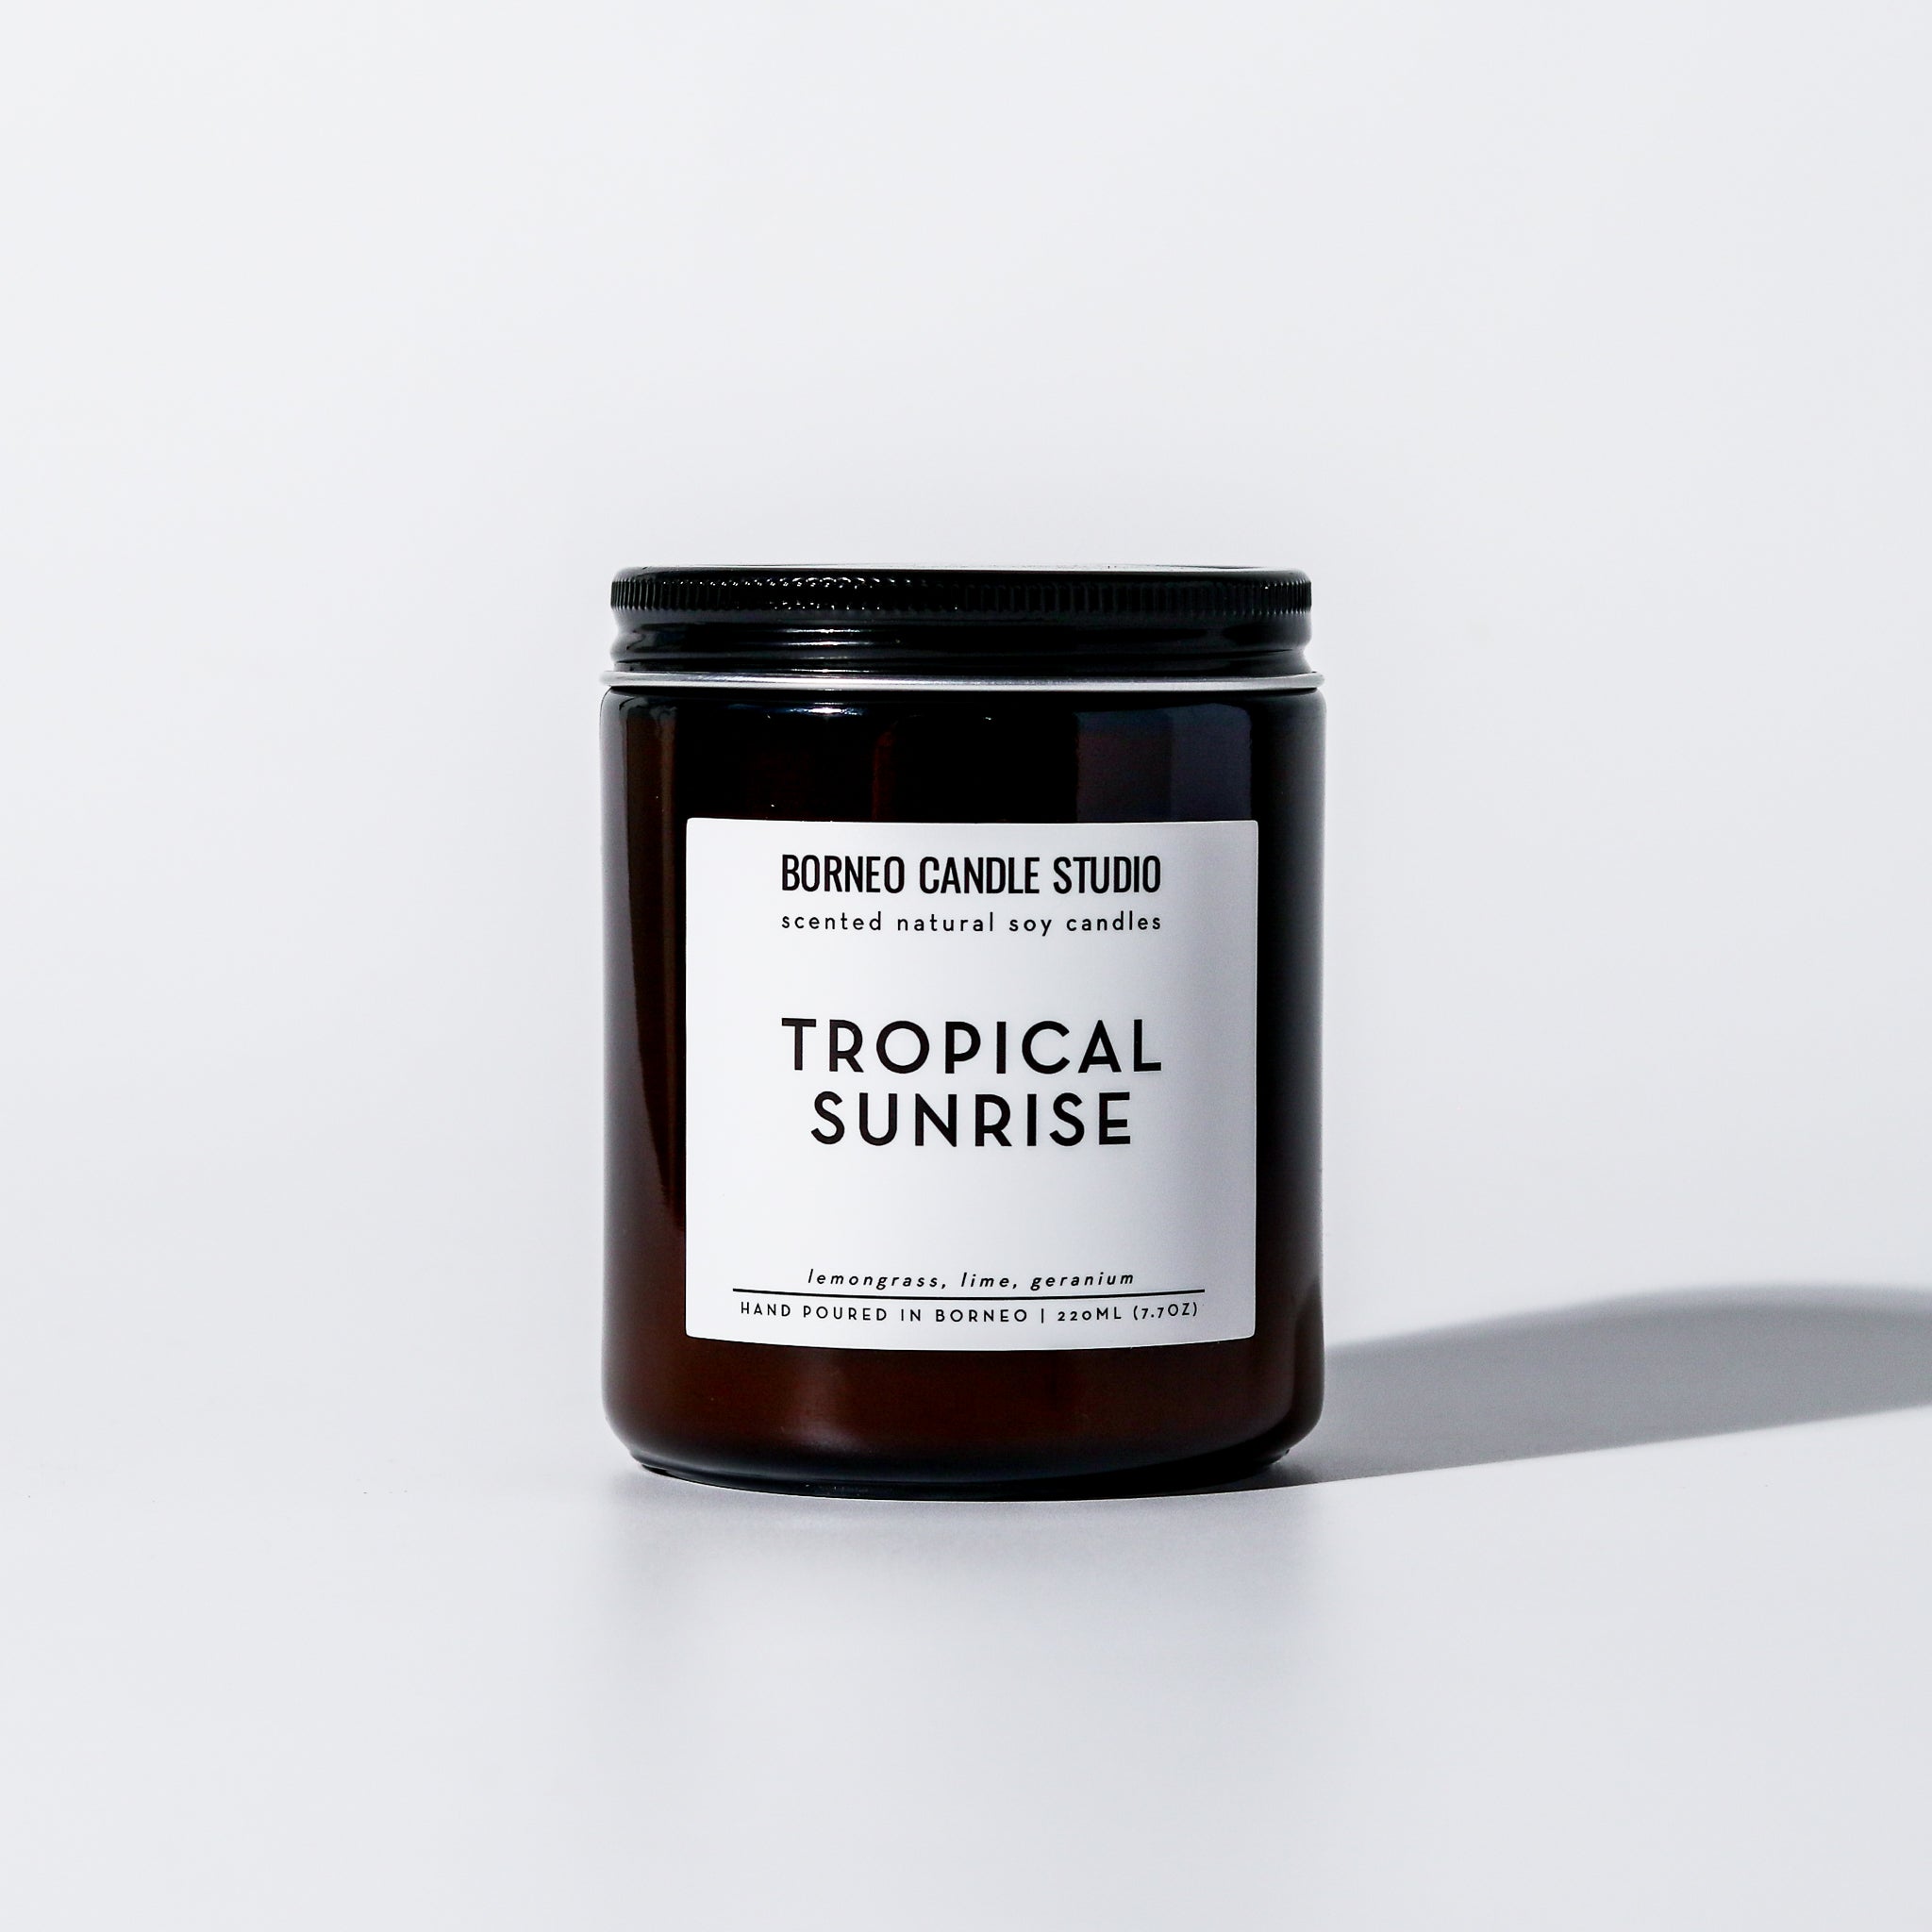 Tropical Sunrise scented candle with lemongrass, lime, geranium soy candle